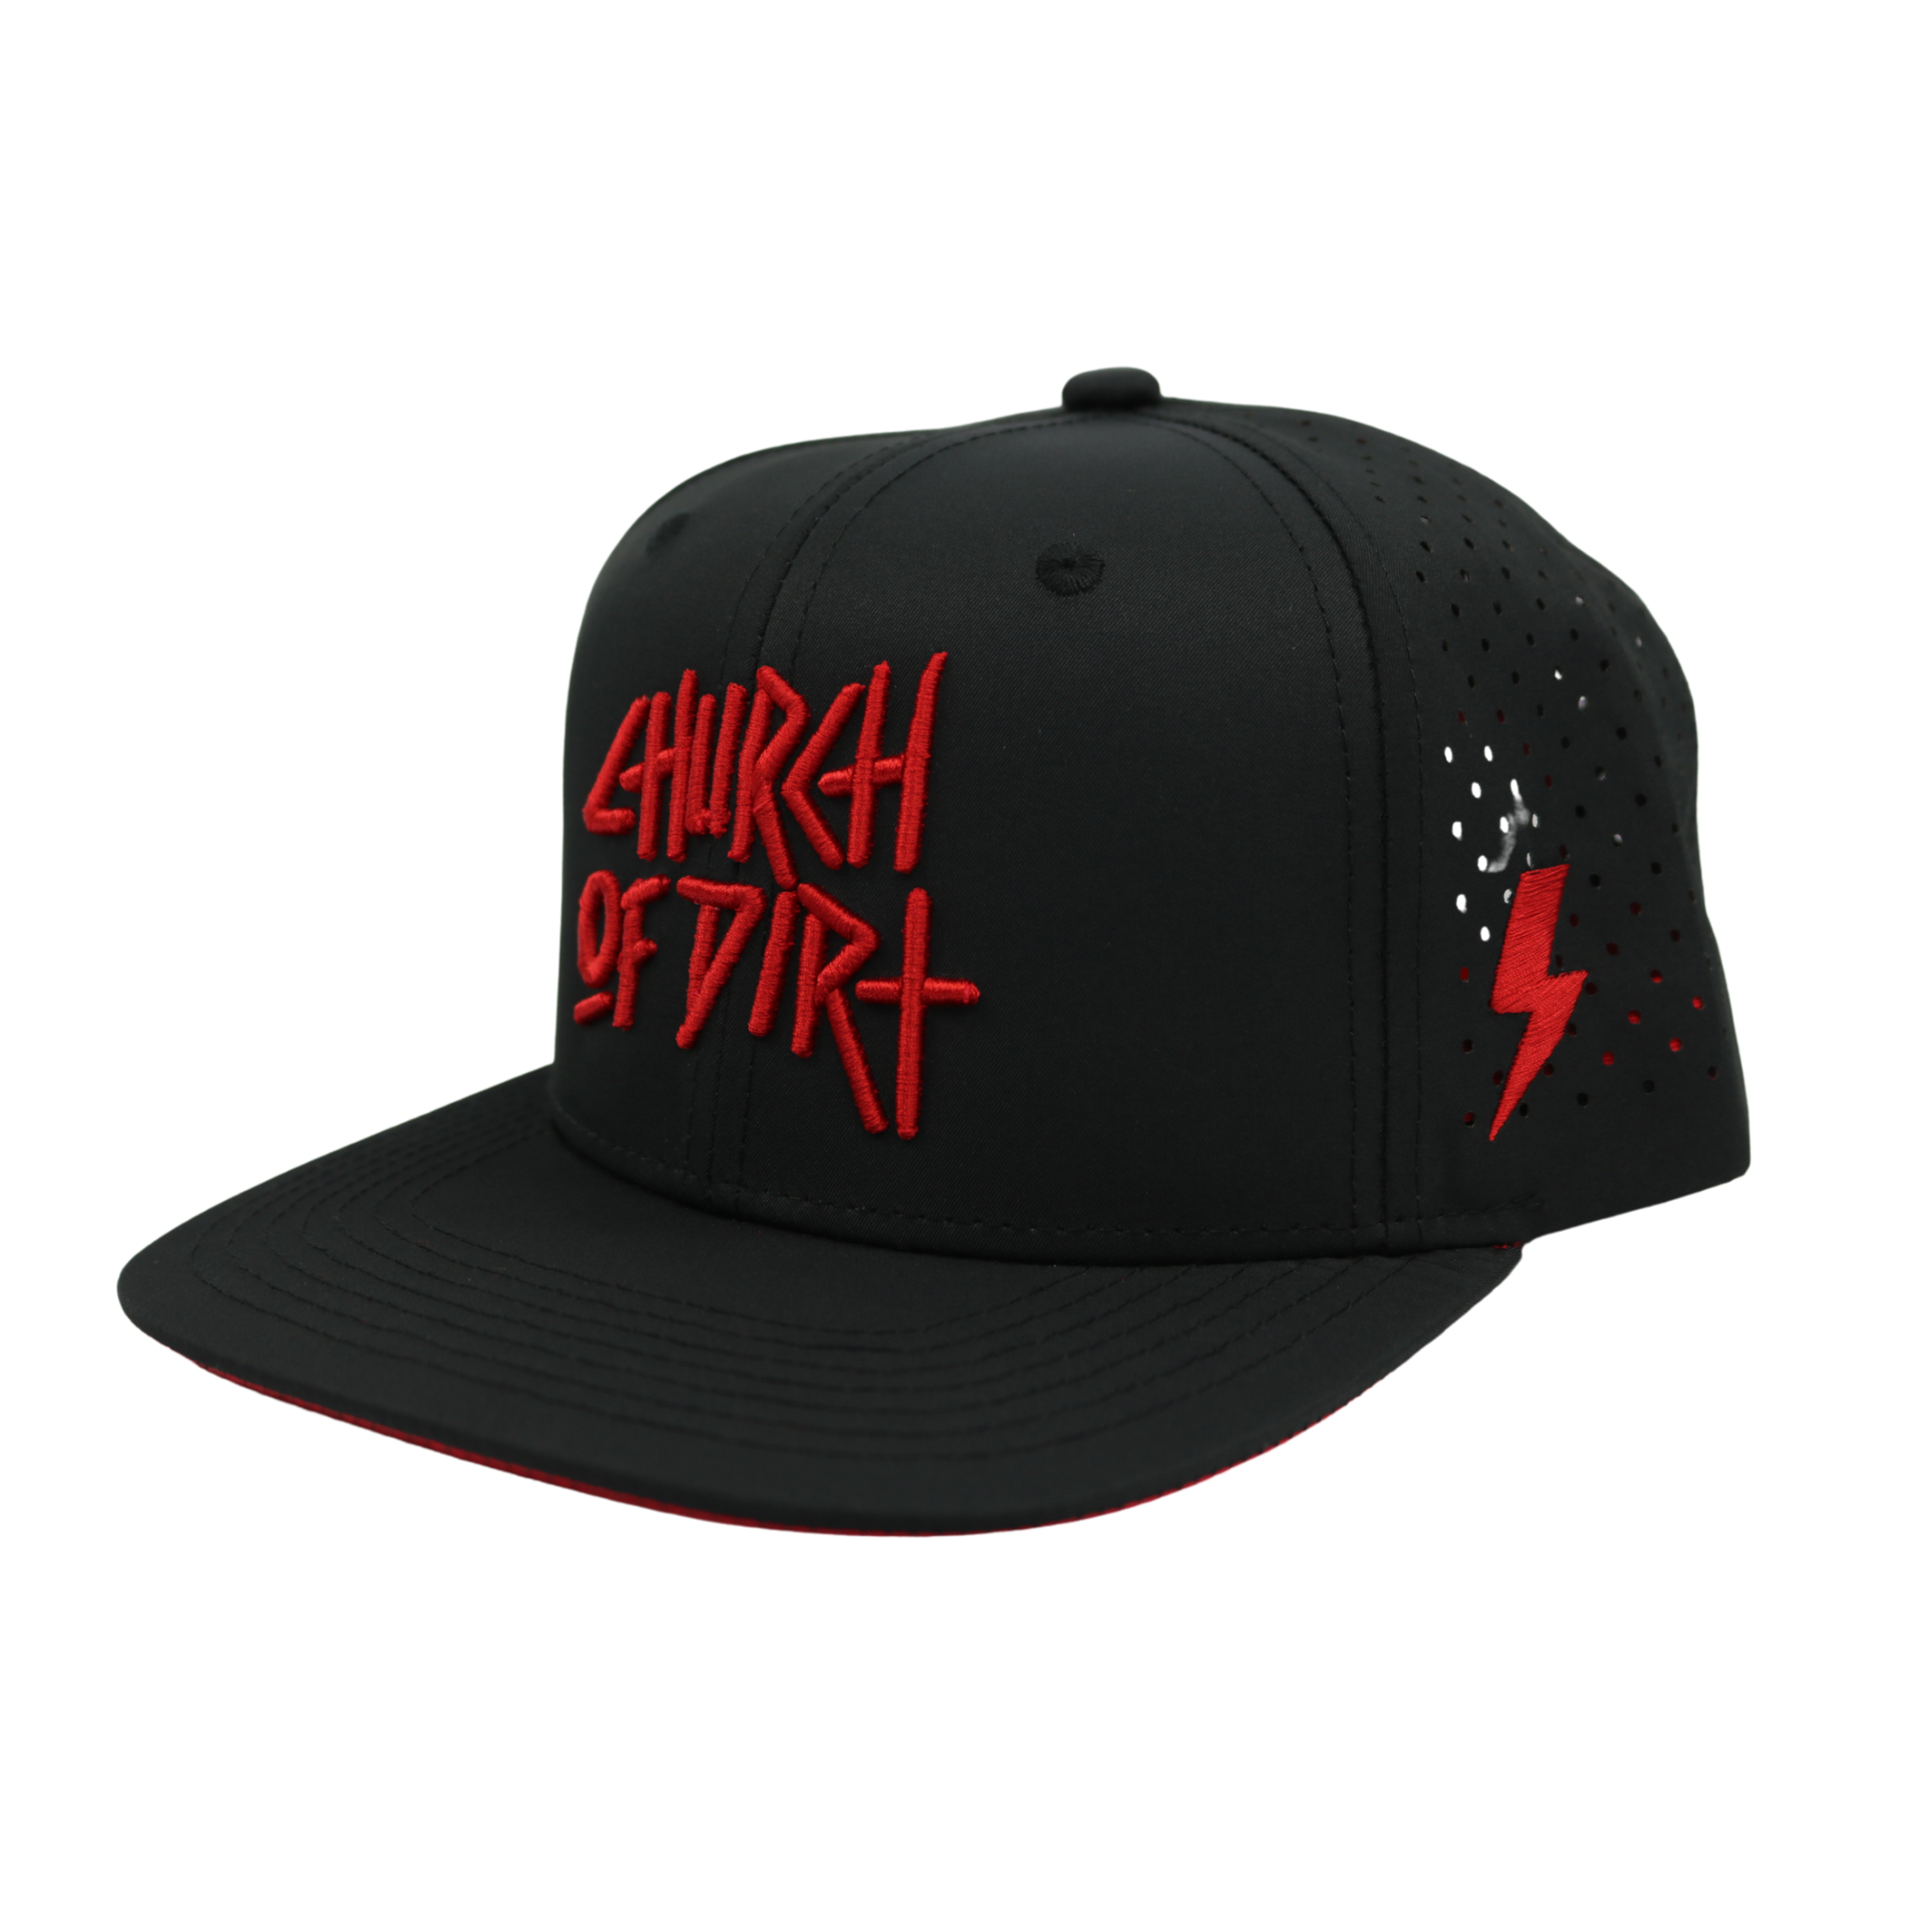 Black & Red Perforated Dirt Surfer Snapback